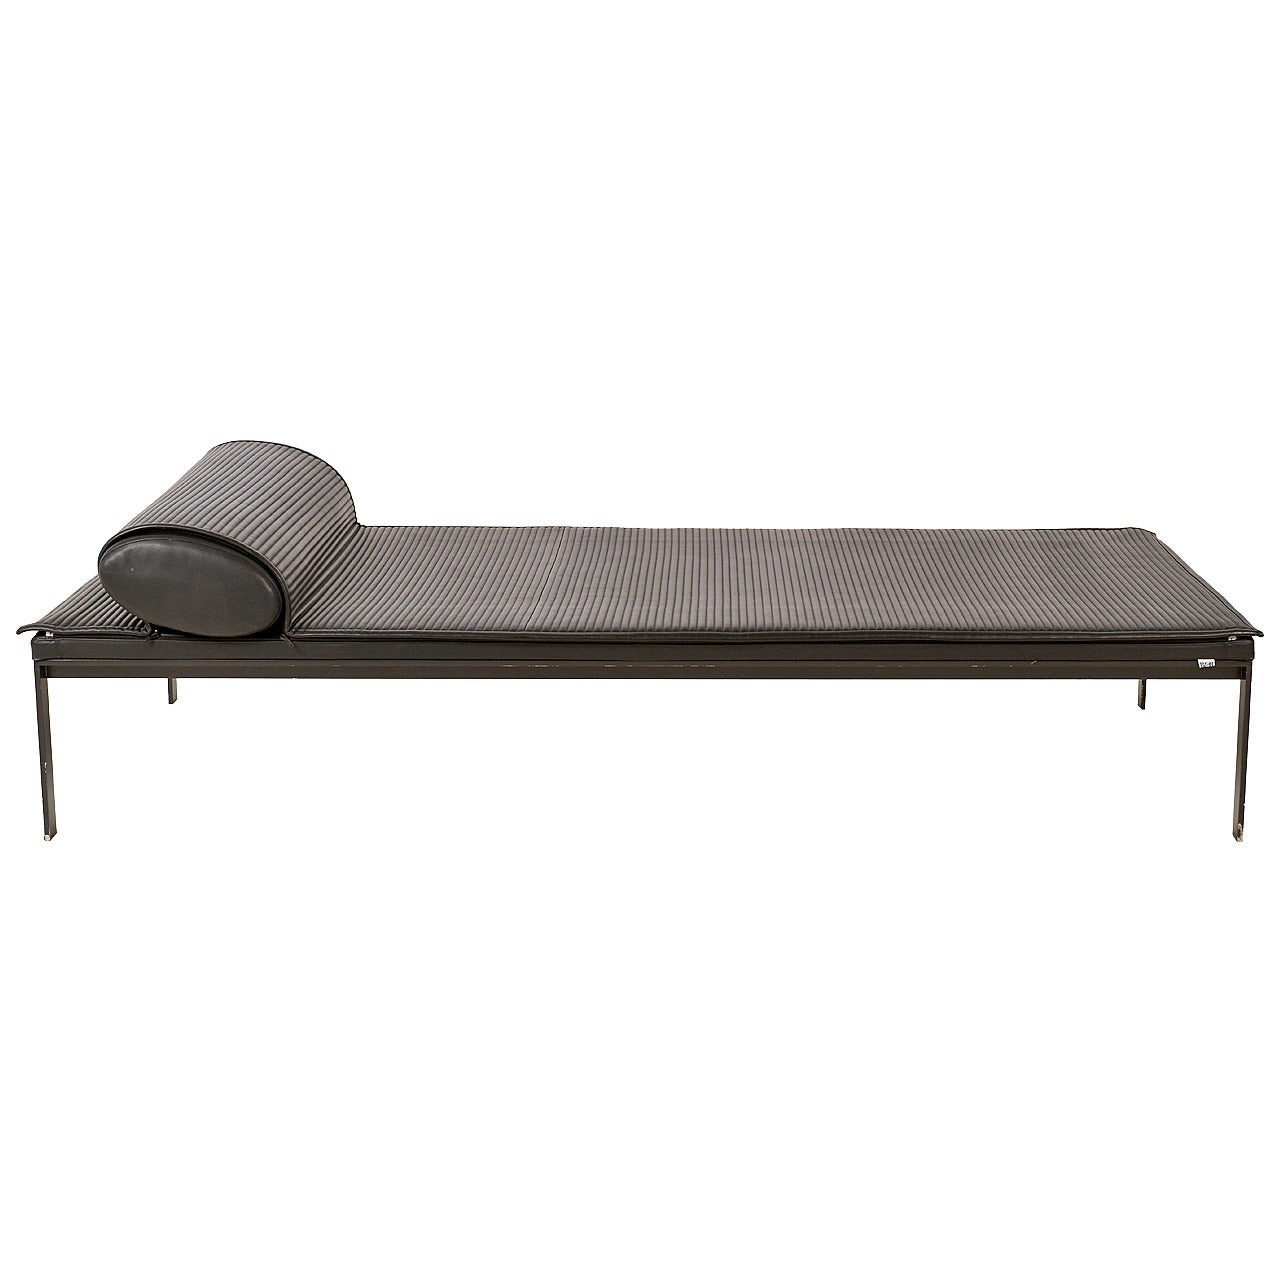 Rare Daybed Designed by Vincent van Duysen for B&B Italia